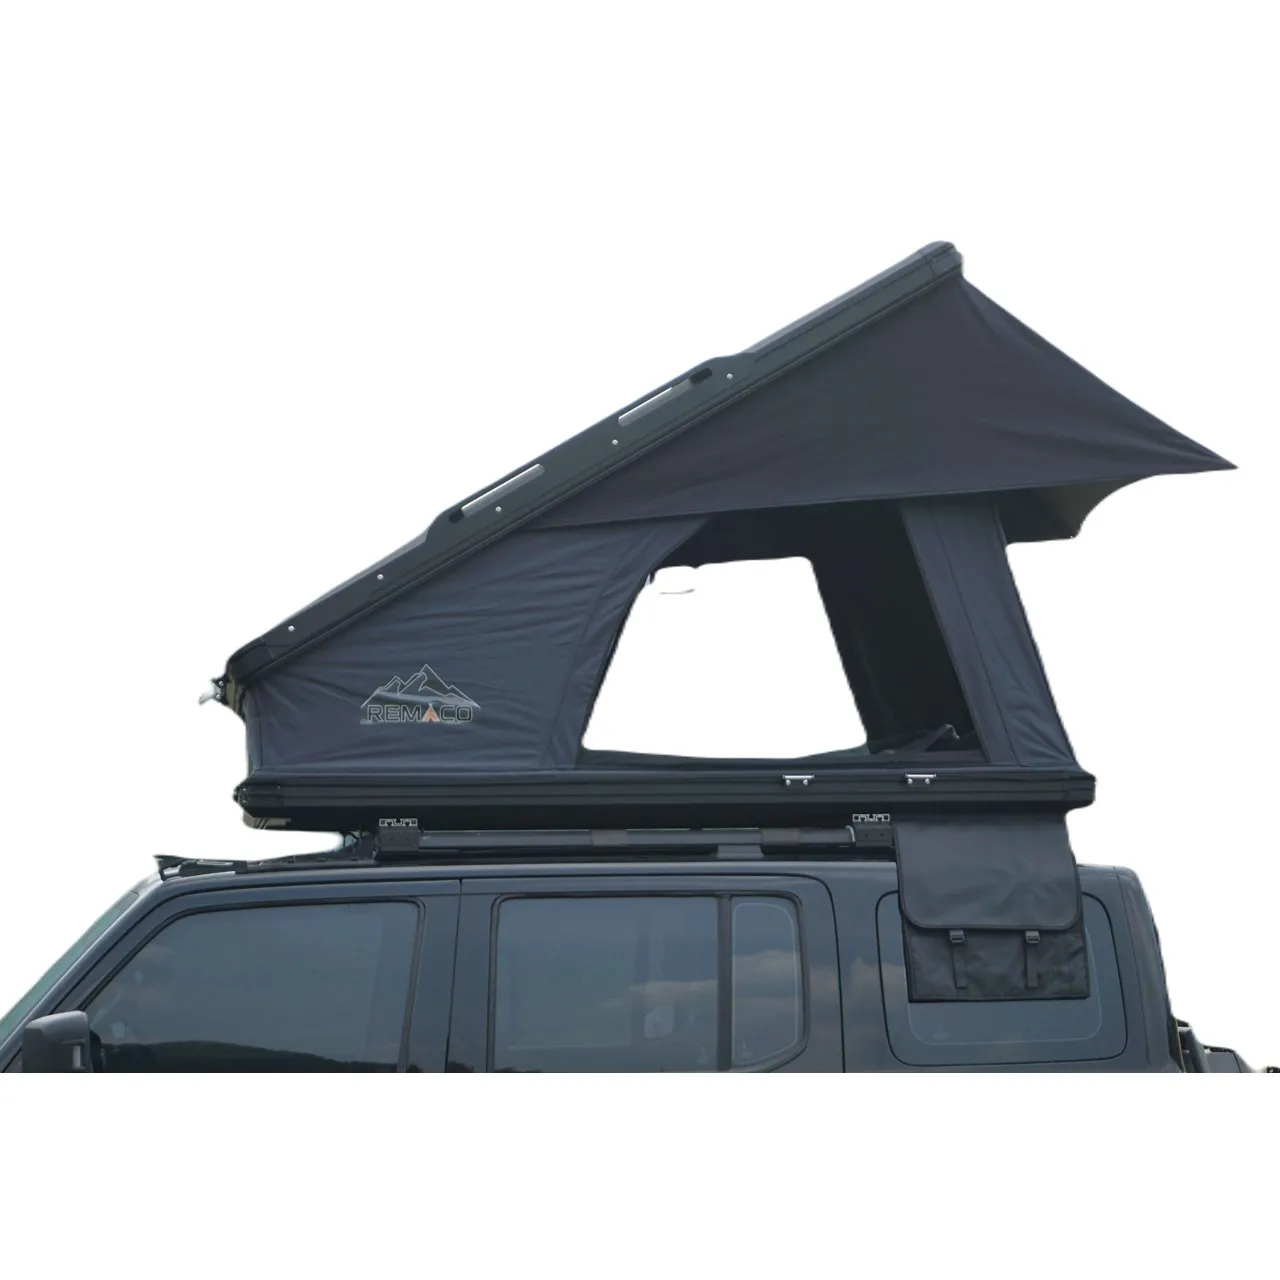 

Remaco Outdoor Camping Aluminum 4 Person Hardtop Roof Tents for Vehicles, Large Clamshell Hard Shell RTT Wedge Roof Top Tent